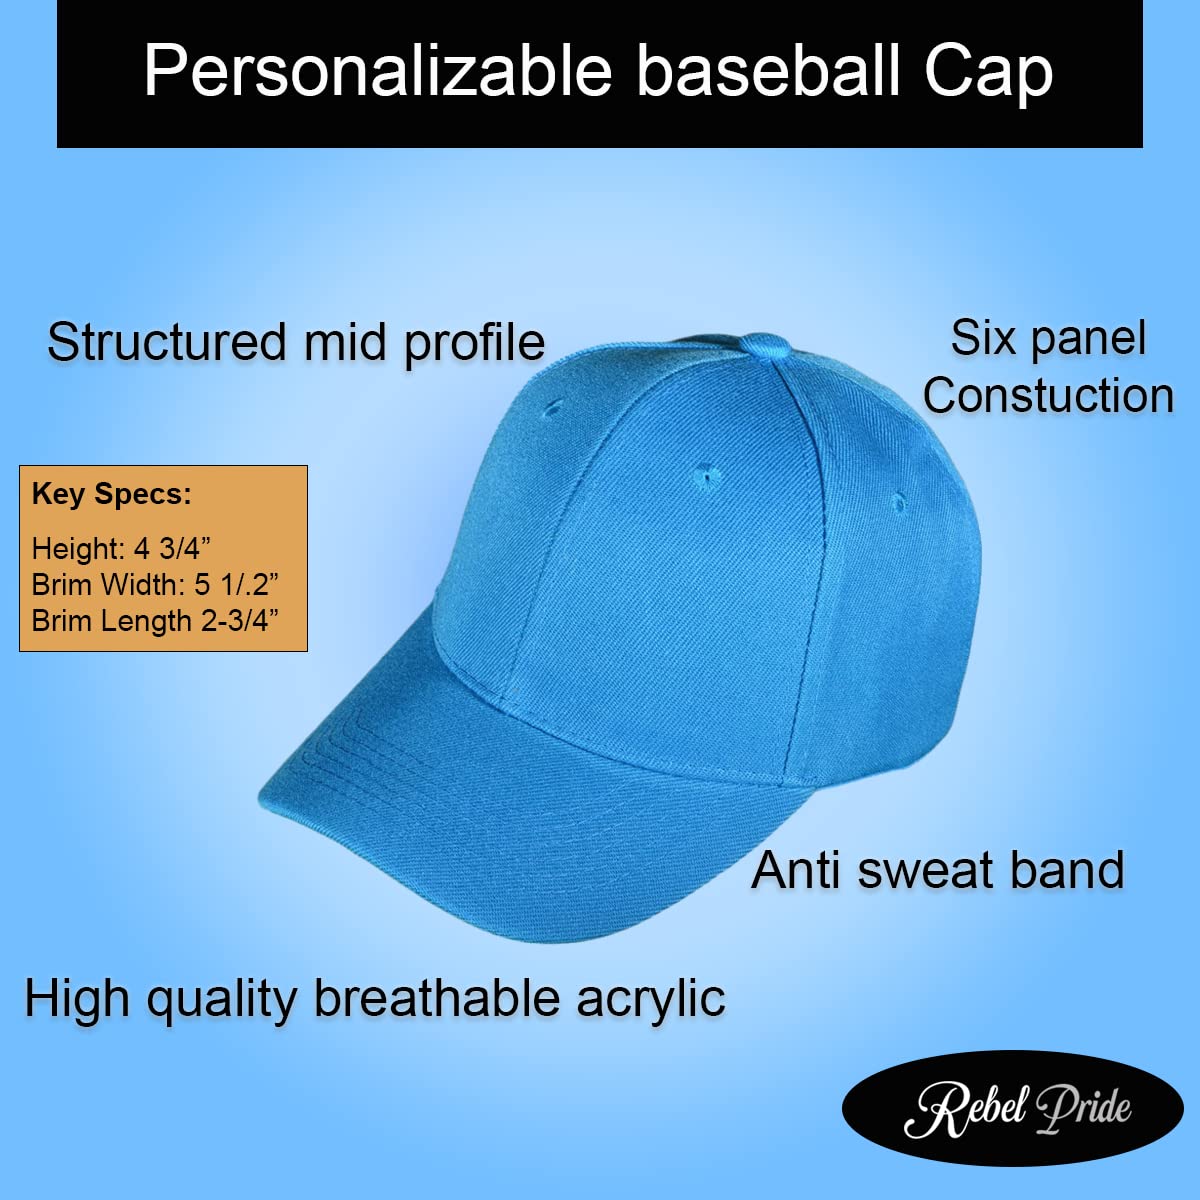 light blue hat product features